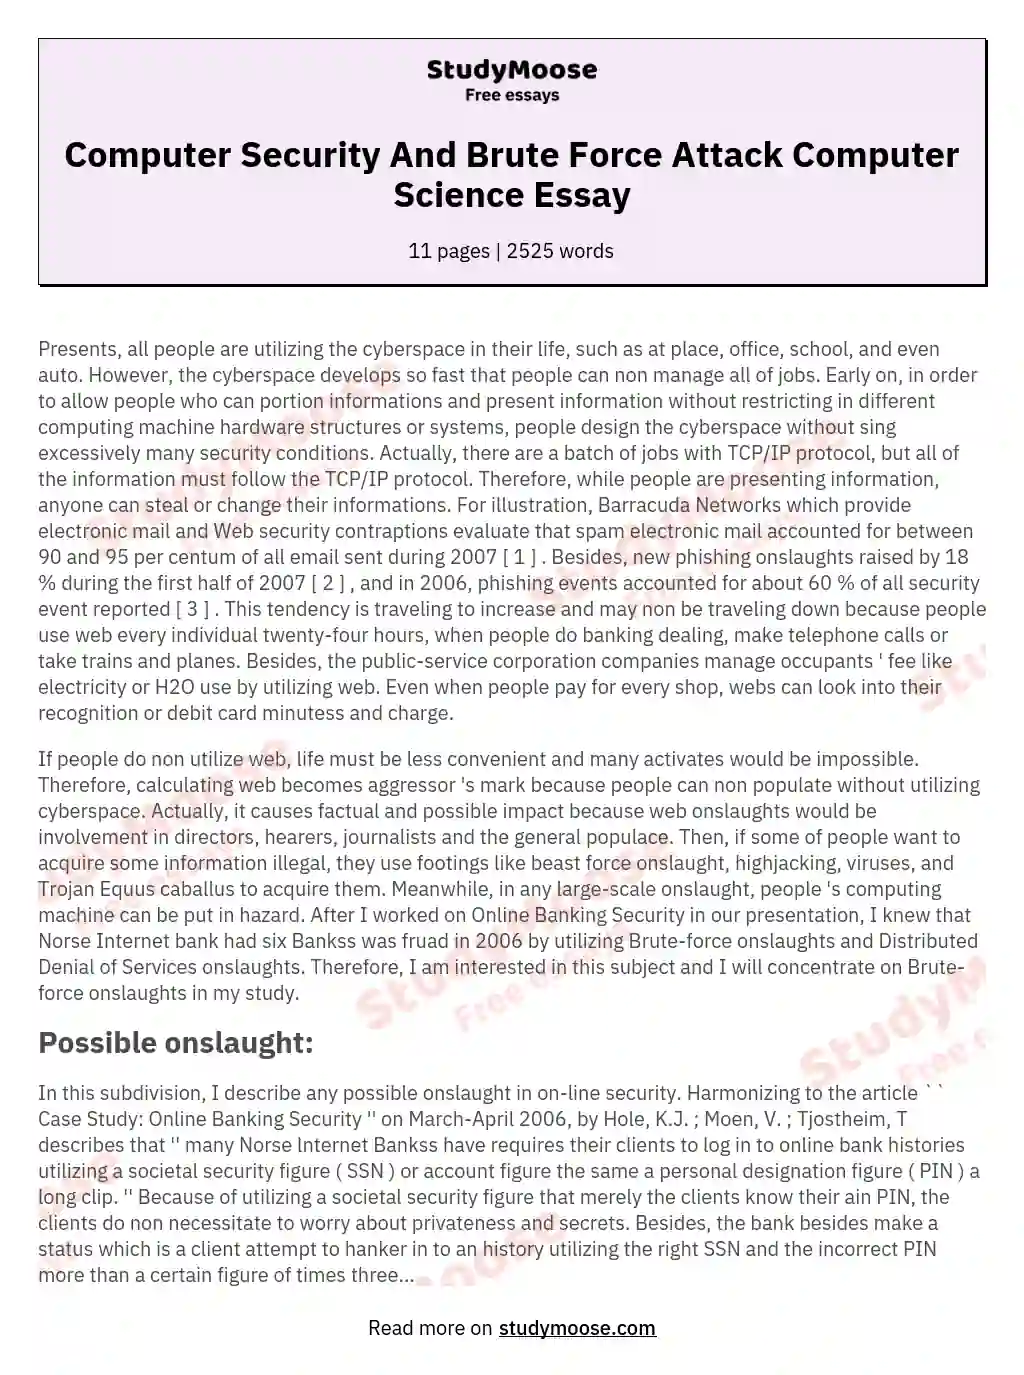 Computer Security And Brute Force Attack Computer Science Essay essay